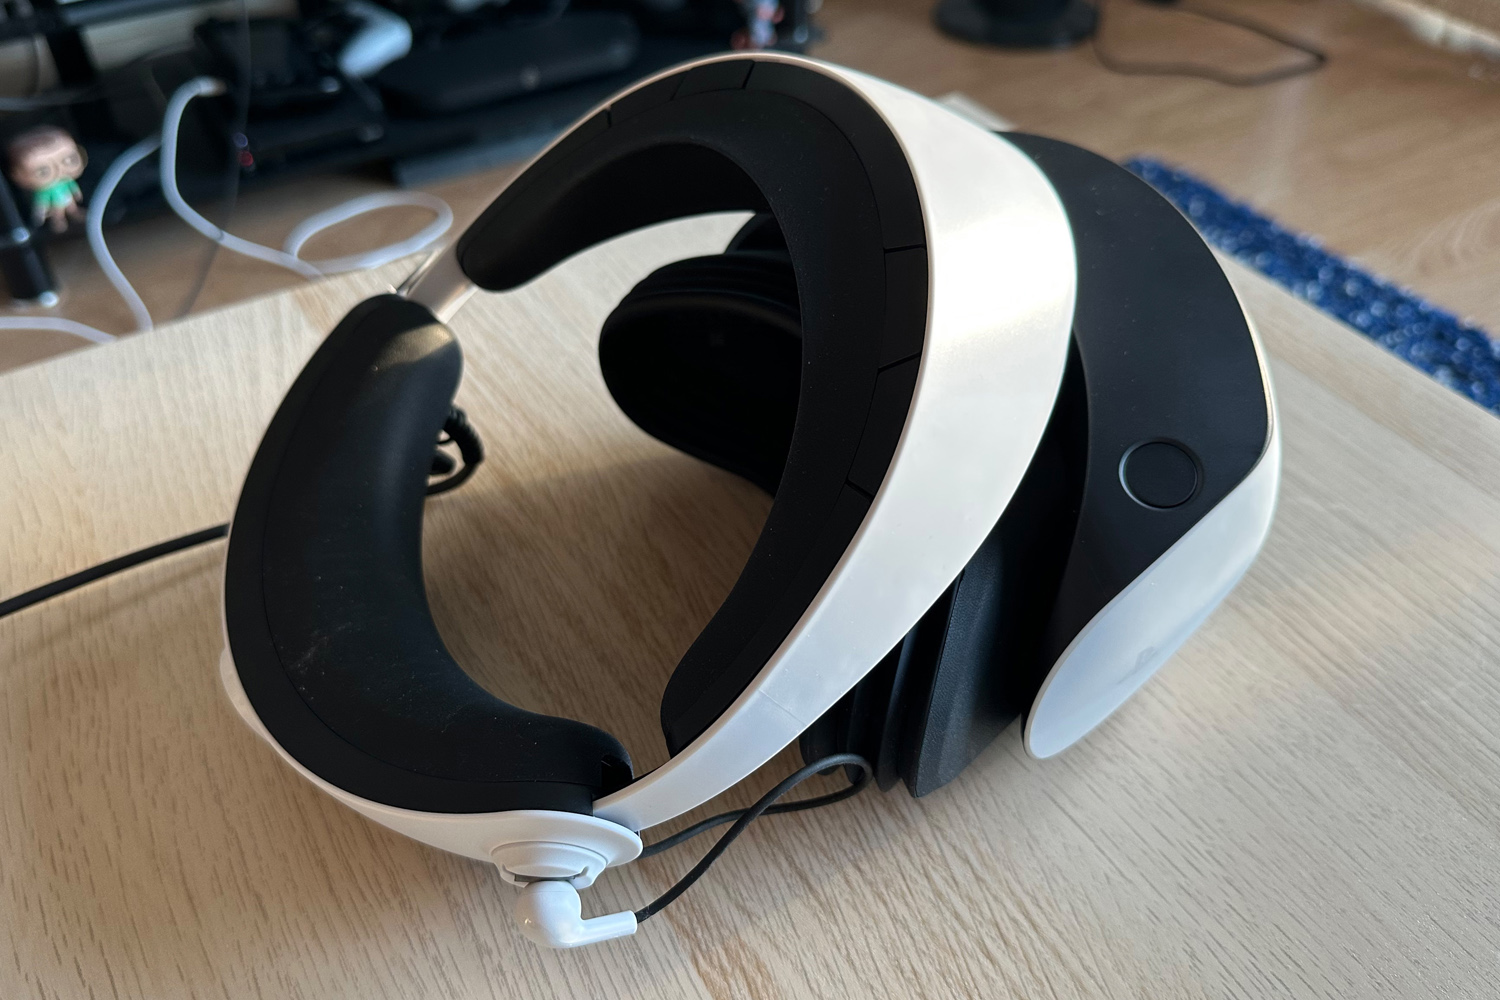 Playstation VR 2 review: The headset that VR gaming needed